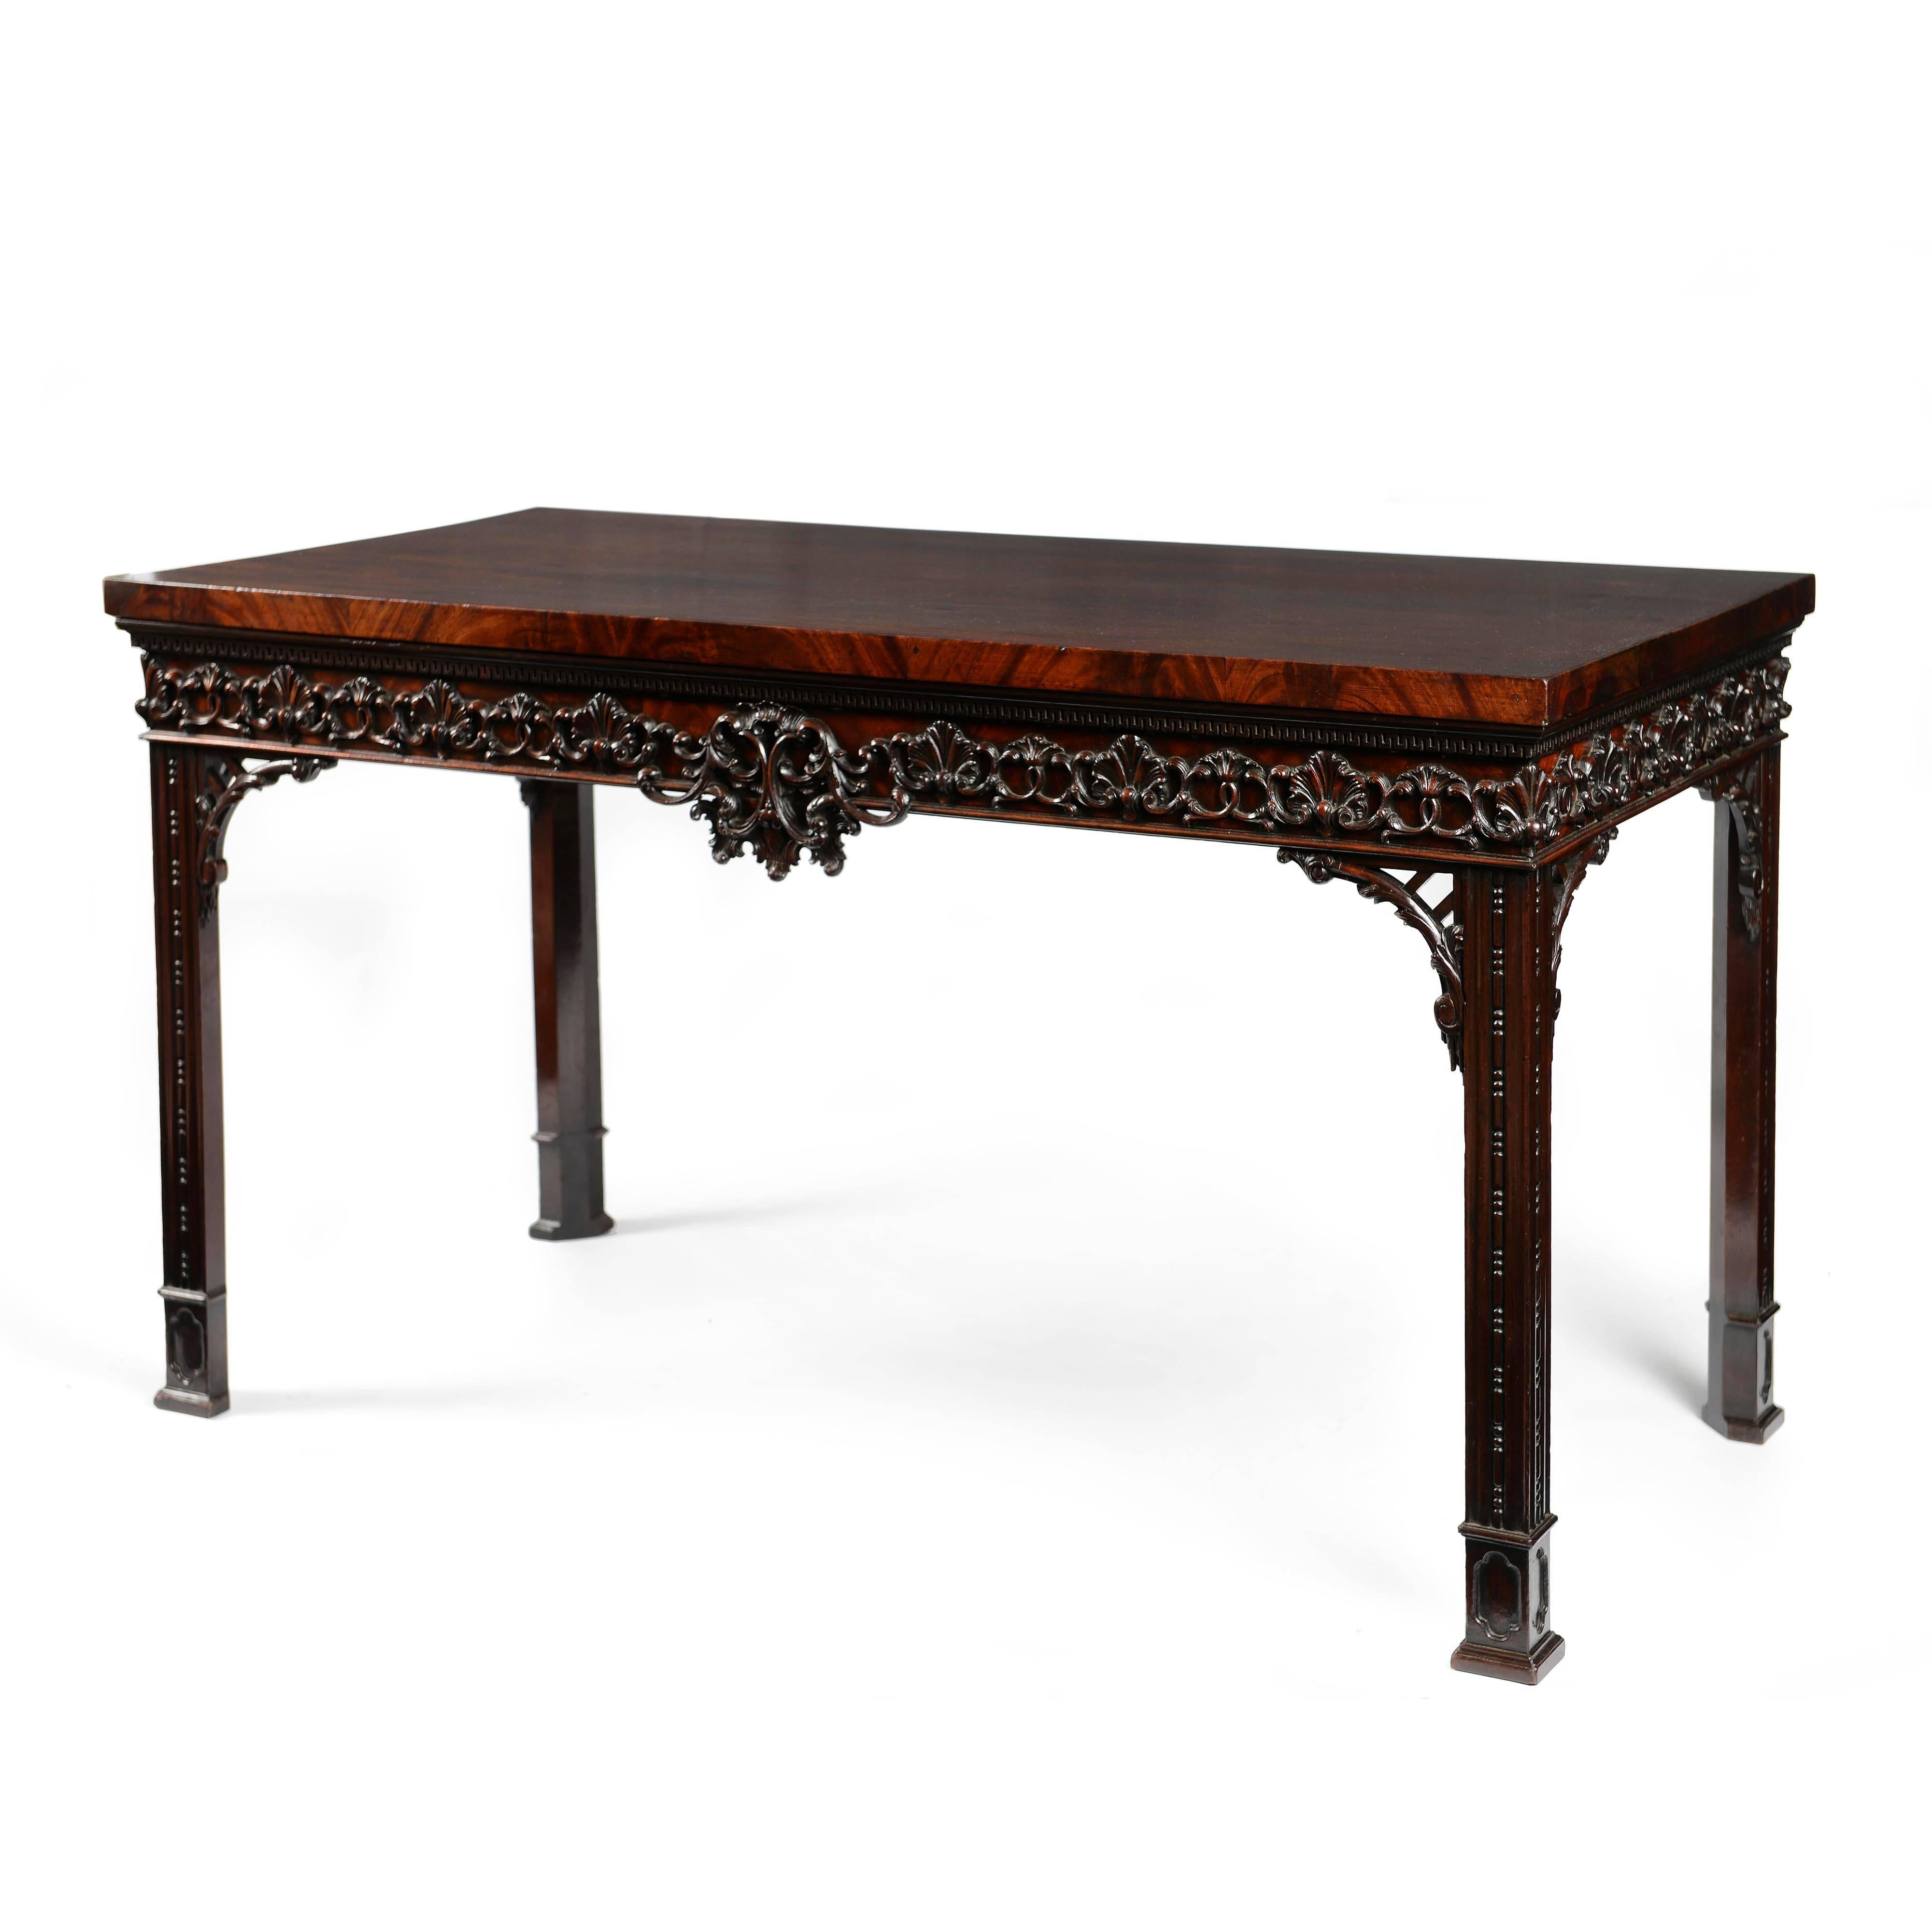 An important, excellently proportioned George II carved mahogany side table, in the manner of Thomas Chippendale, retaining excellent original color and patina. The top constructed of well-chosen figured veneers, on a solid mahogany base with banded